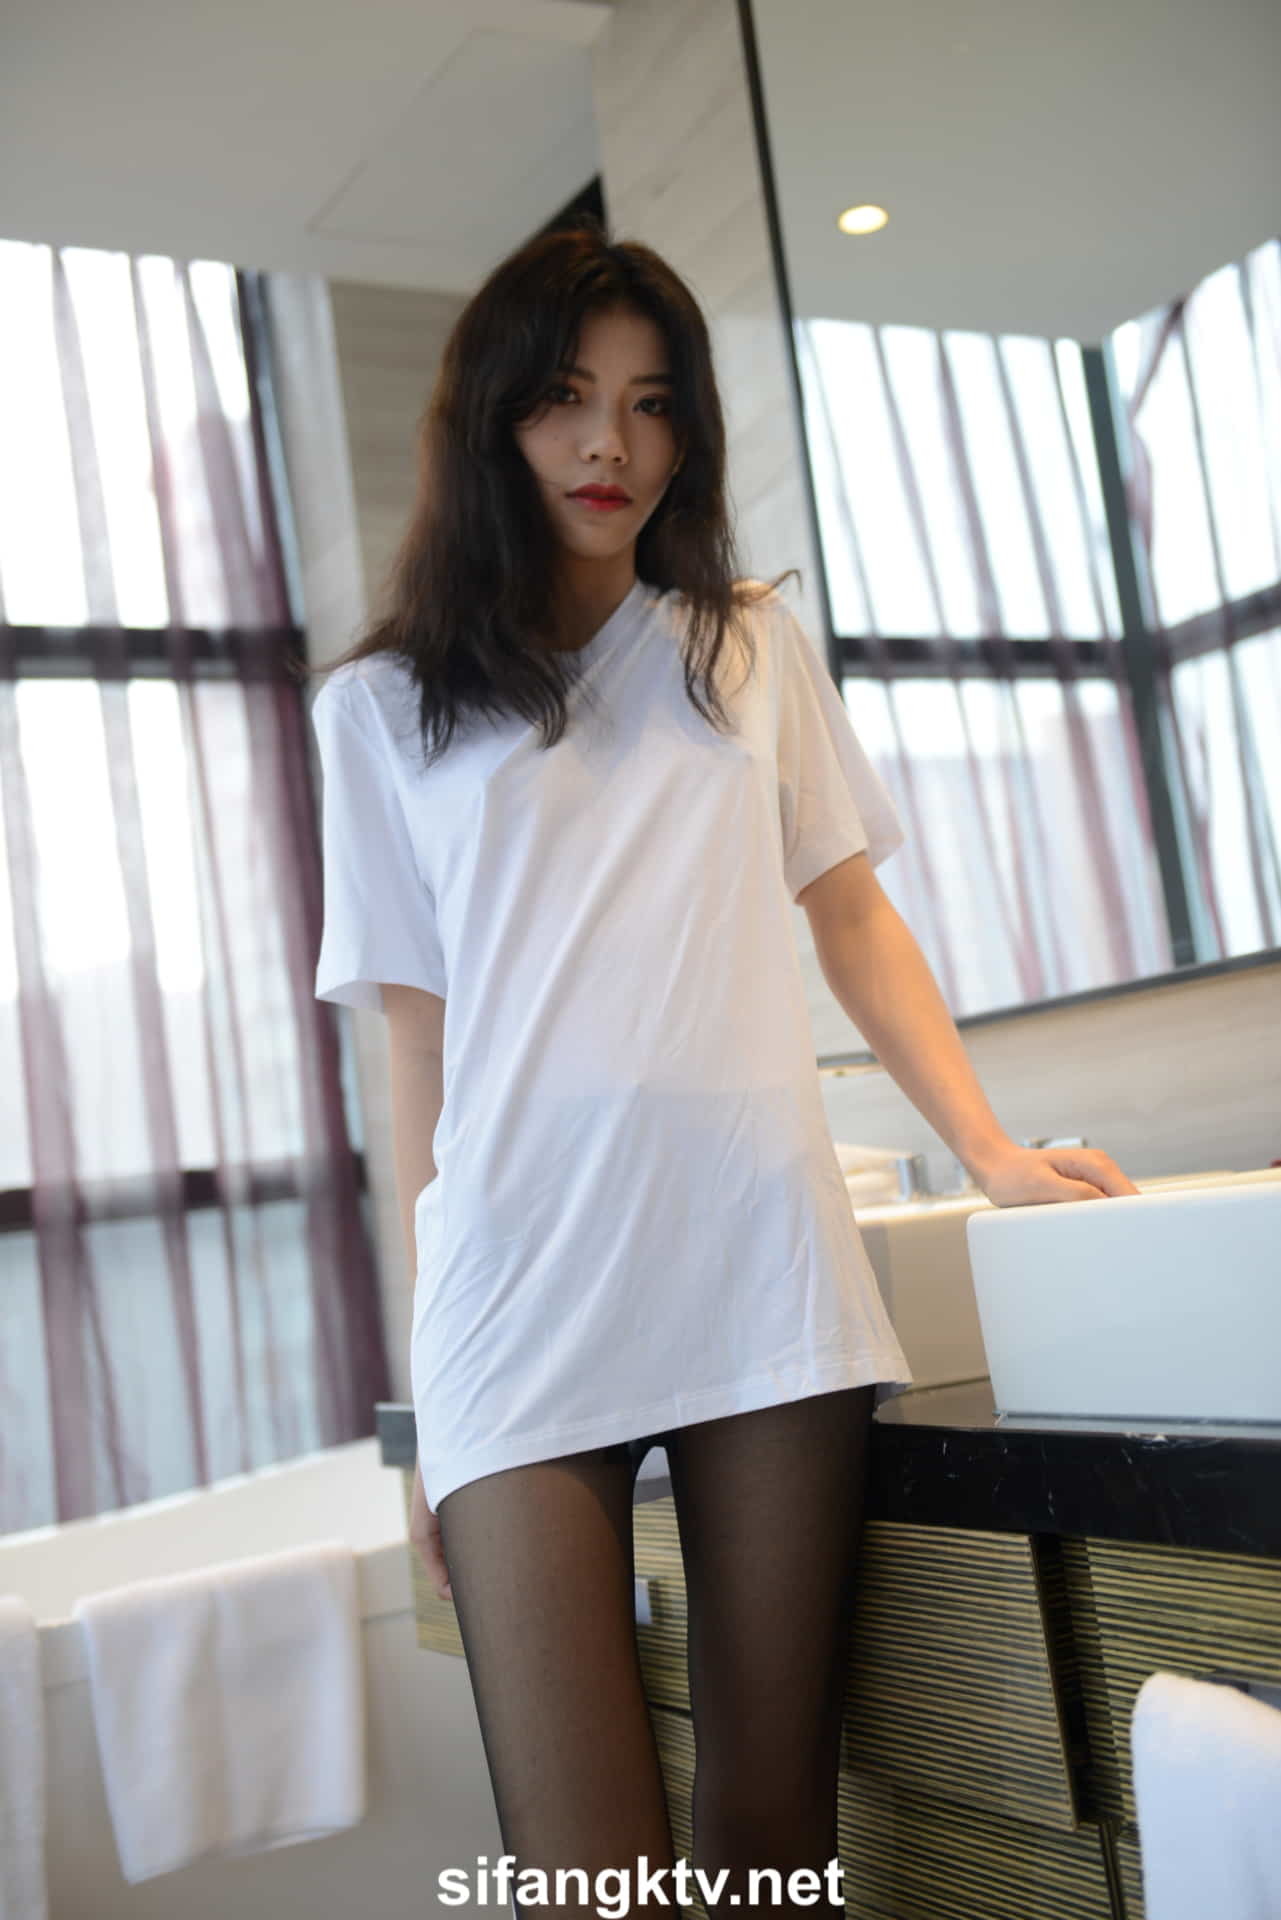 Highly popular PANS goddess with the best contrast, rice balls, large-scale private photos ~ black stockings and white T-shirt with exposed bulges